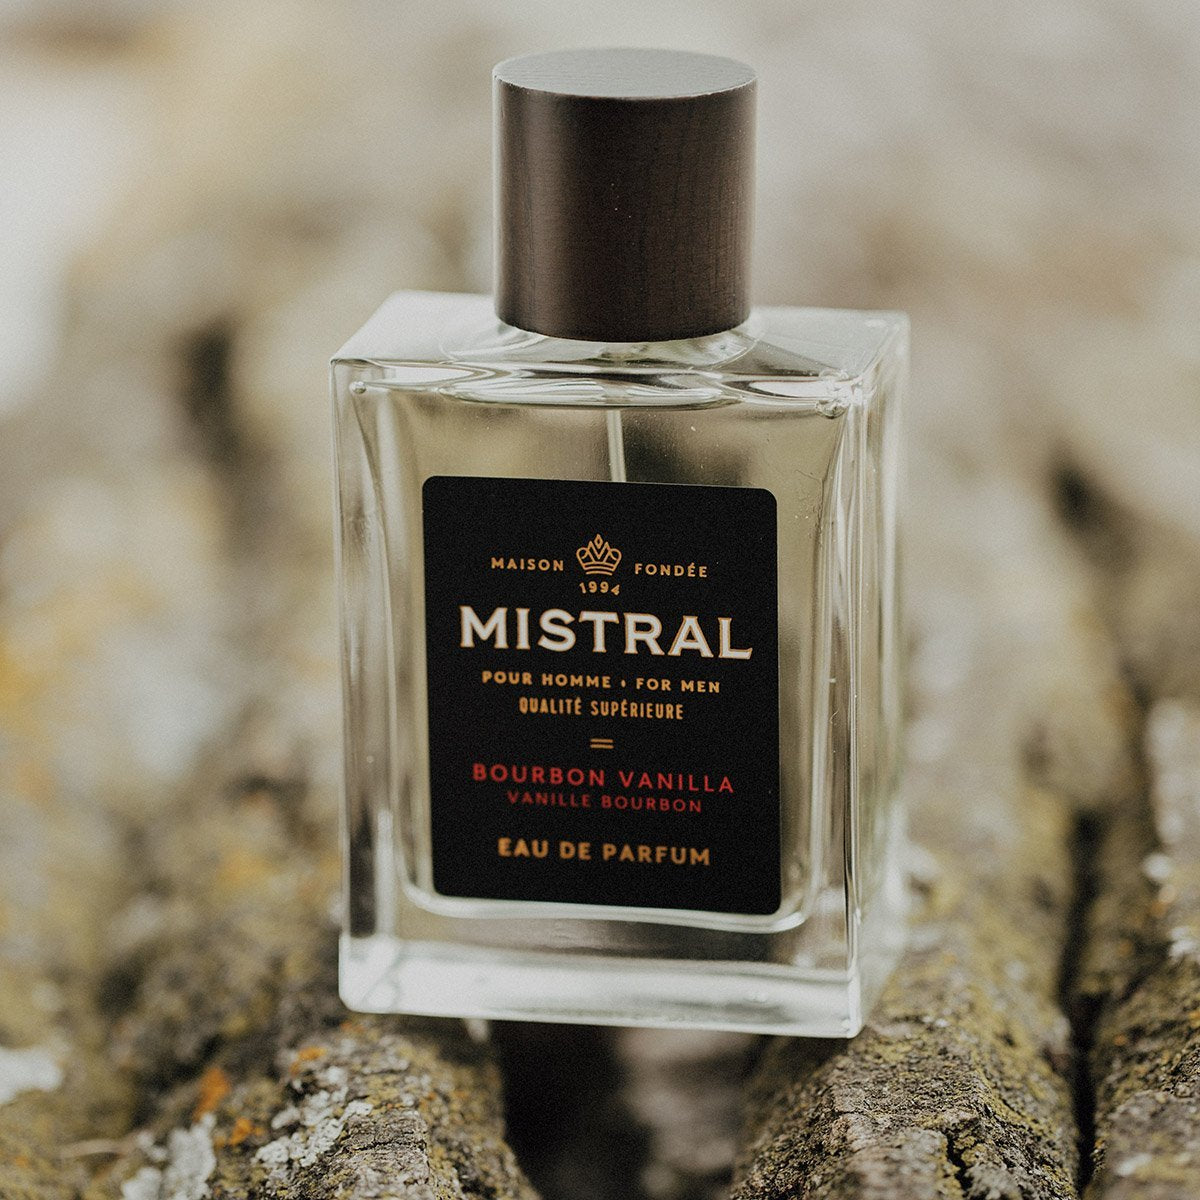 Men's Aftershave, Fragrance & Cologne at great prices